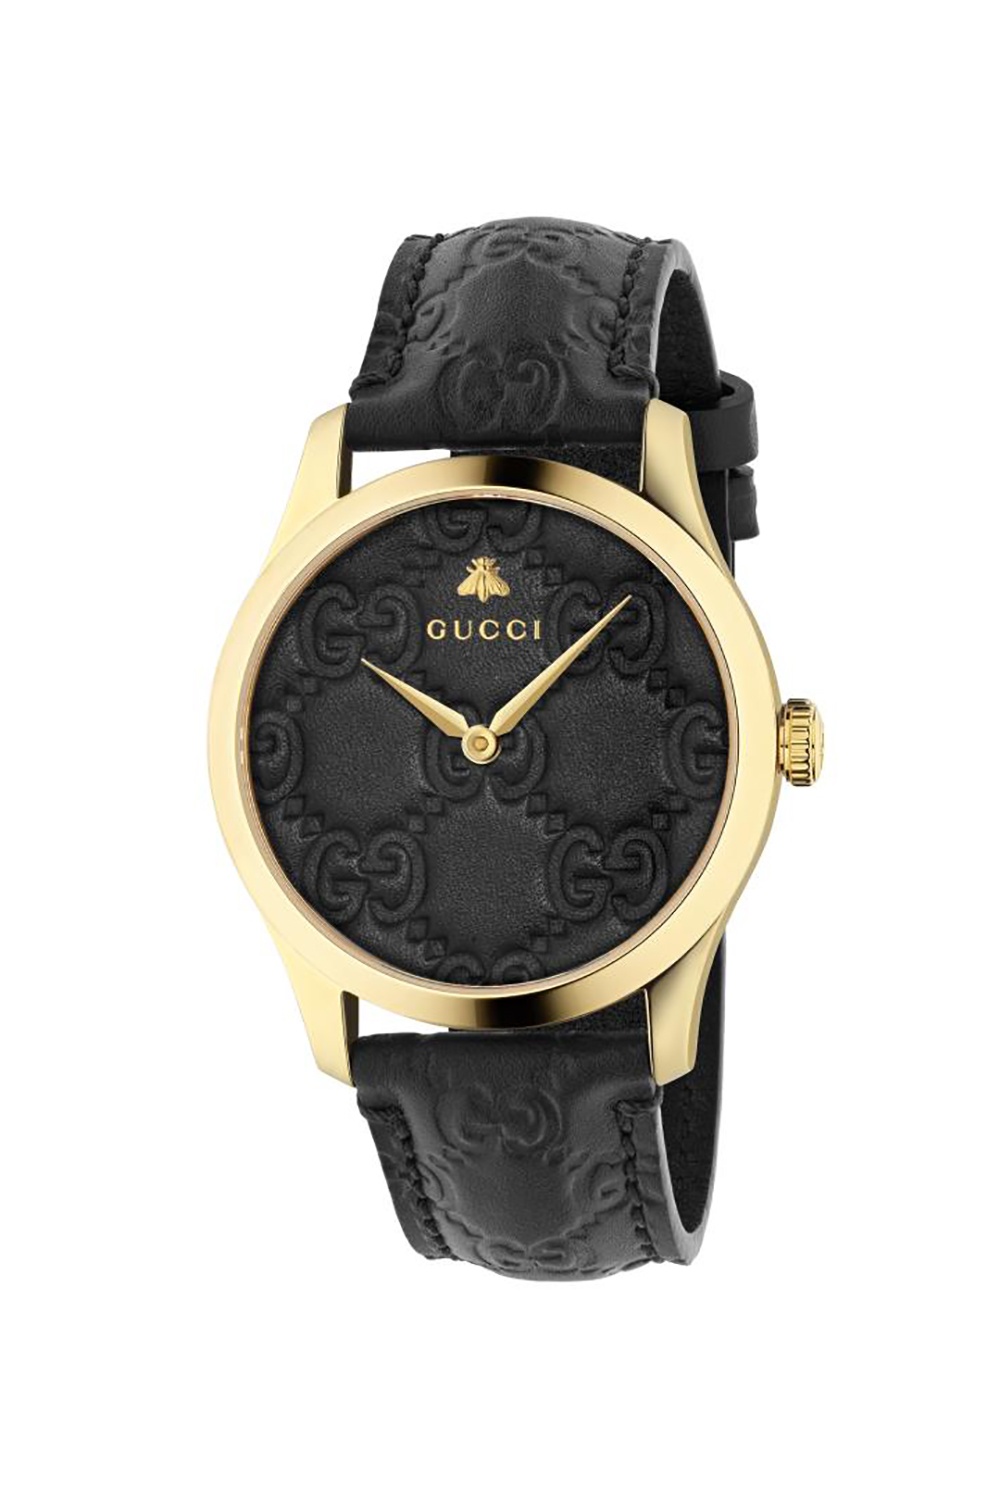 gucci track ‘G-Timeless’ watch